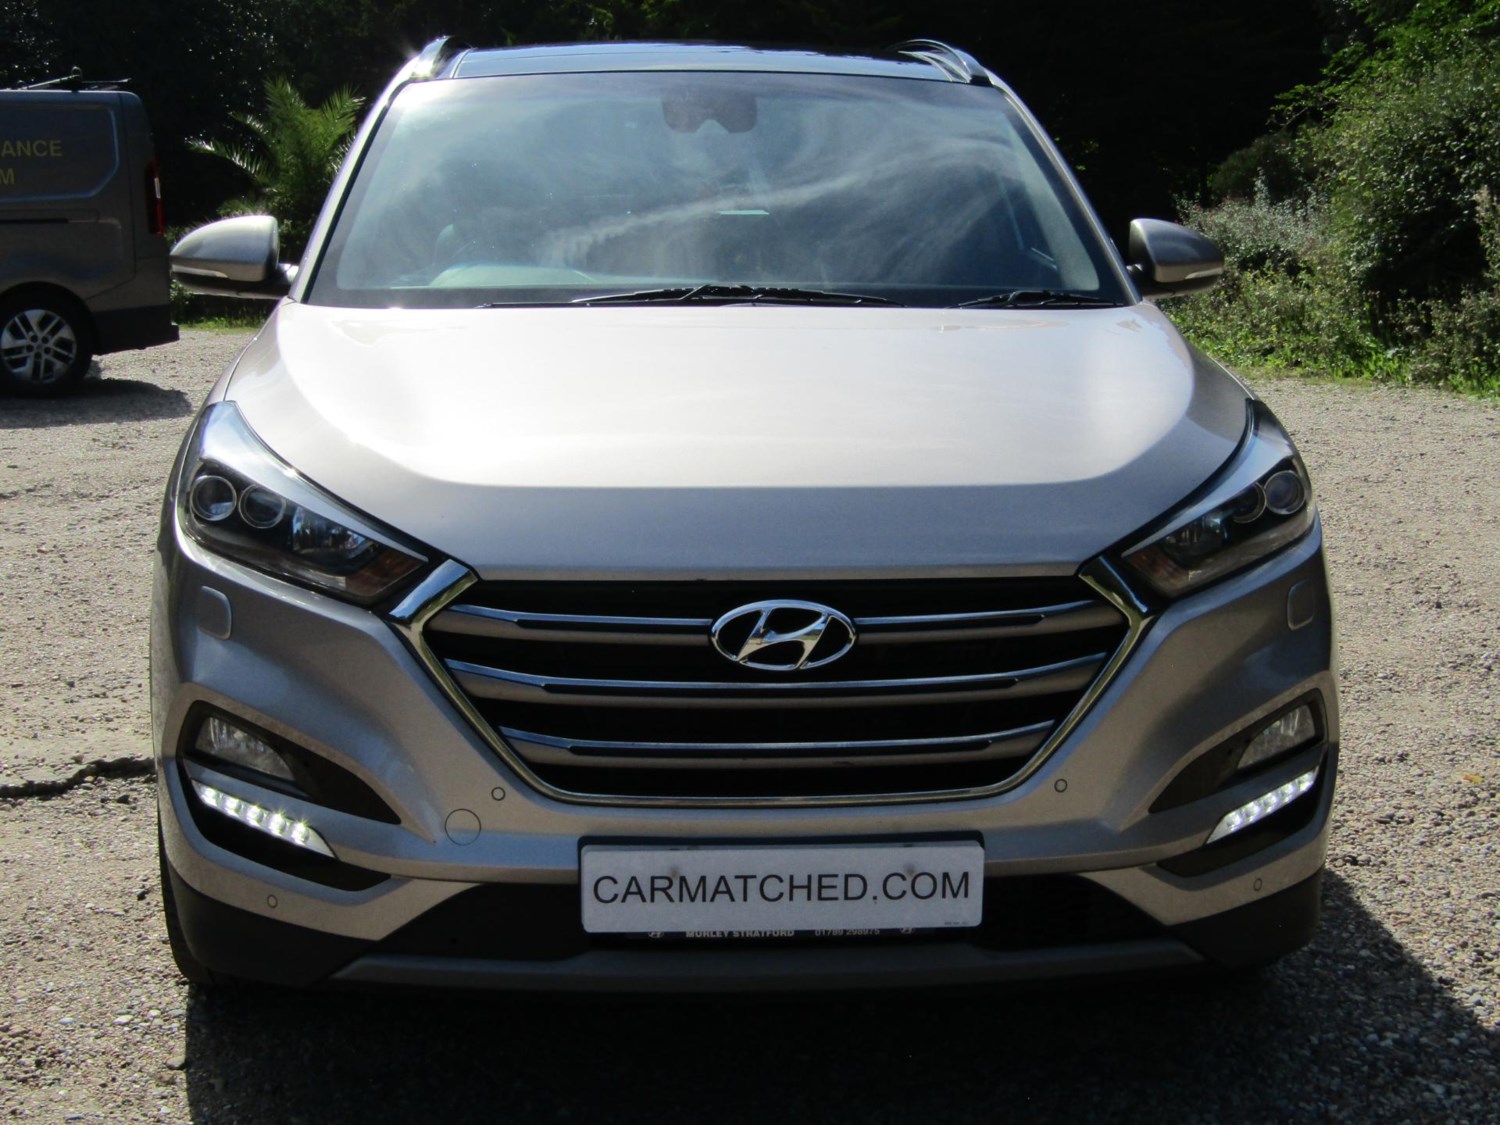 2017 (17) Hyundai Tucson 1.7 CRDi Blue Drive Premium SE 5dr 2WD DCT For Sale In Broadstairs, Kent